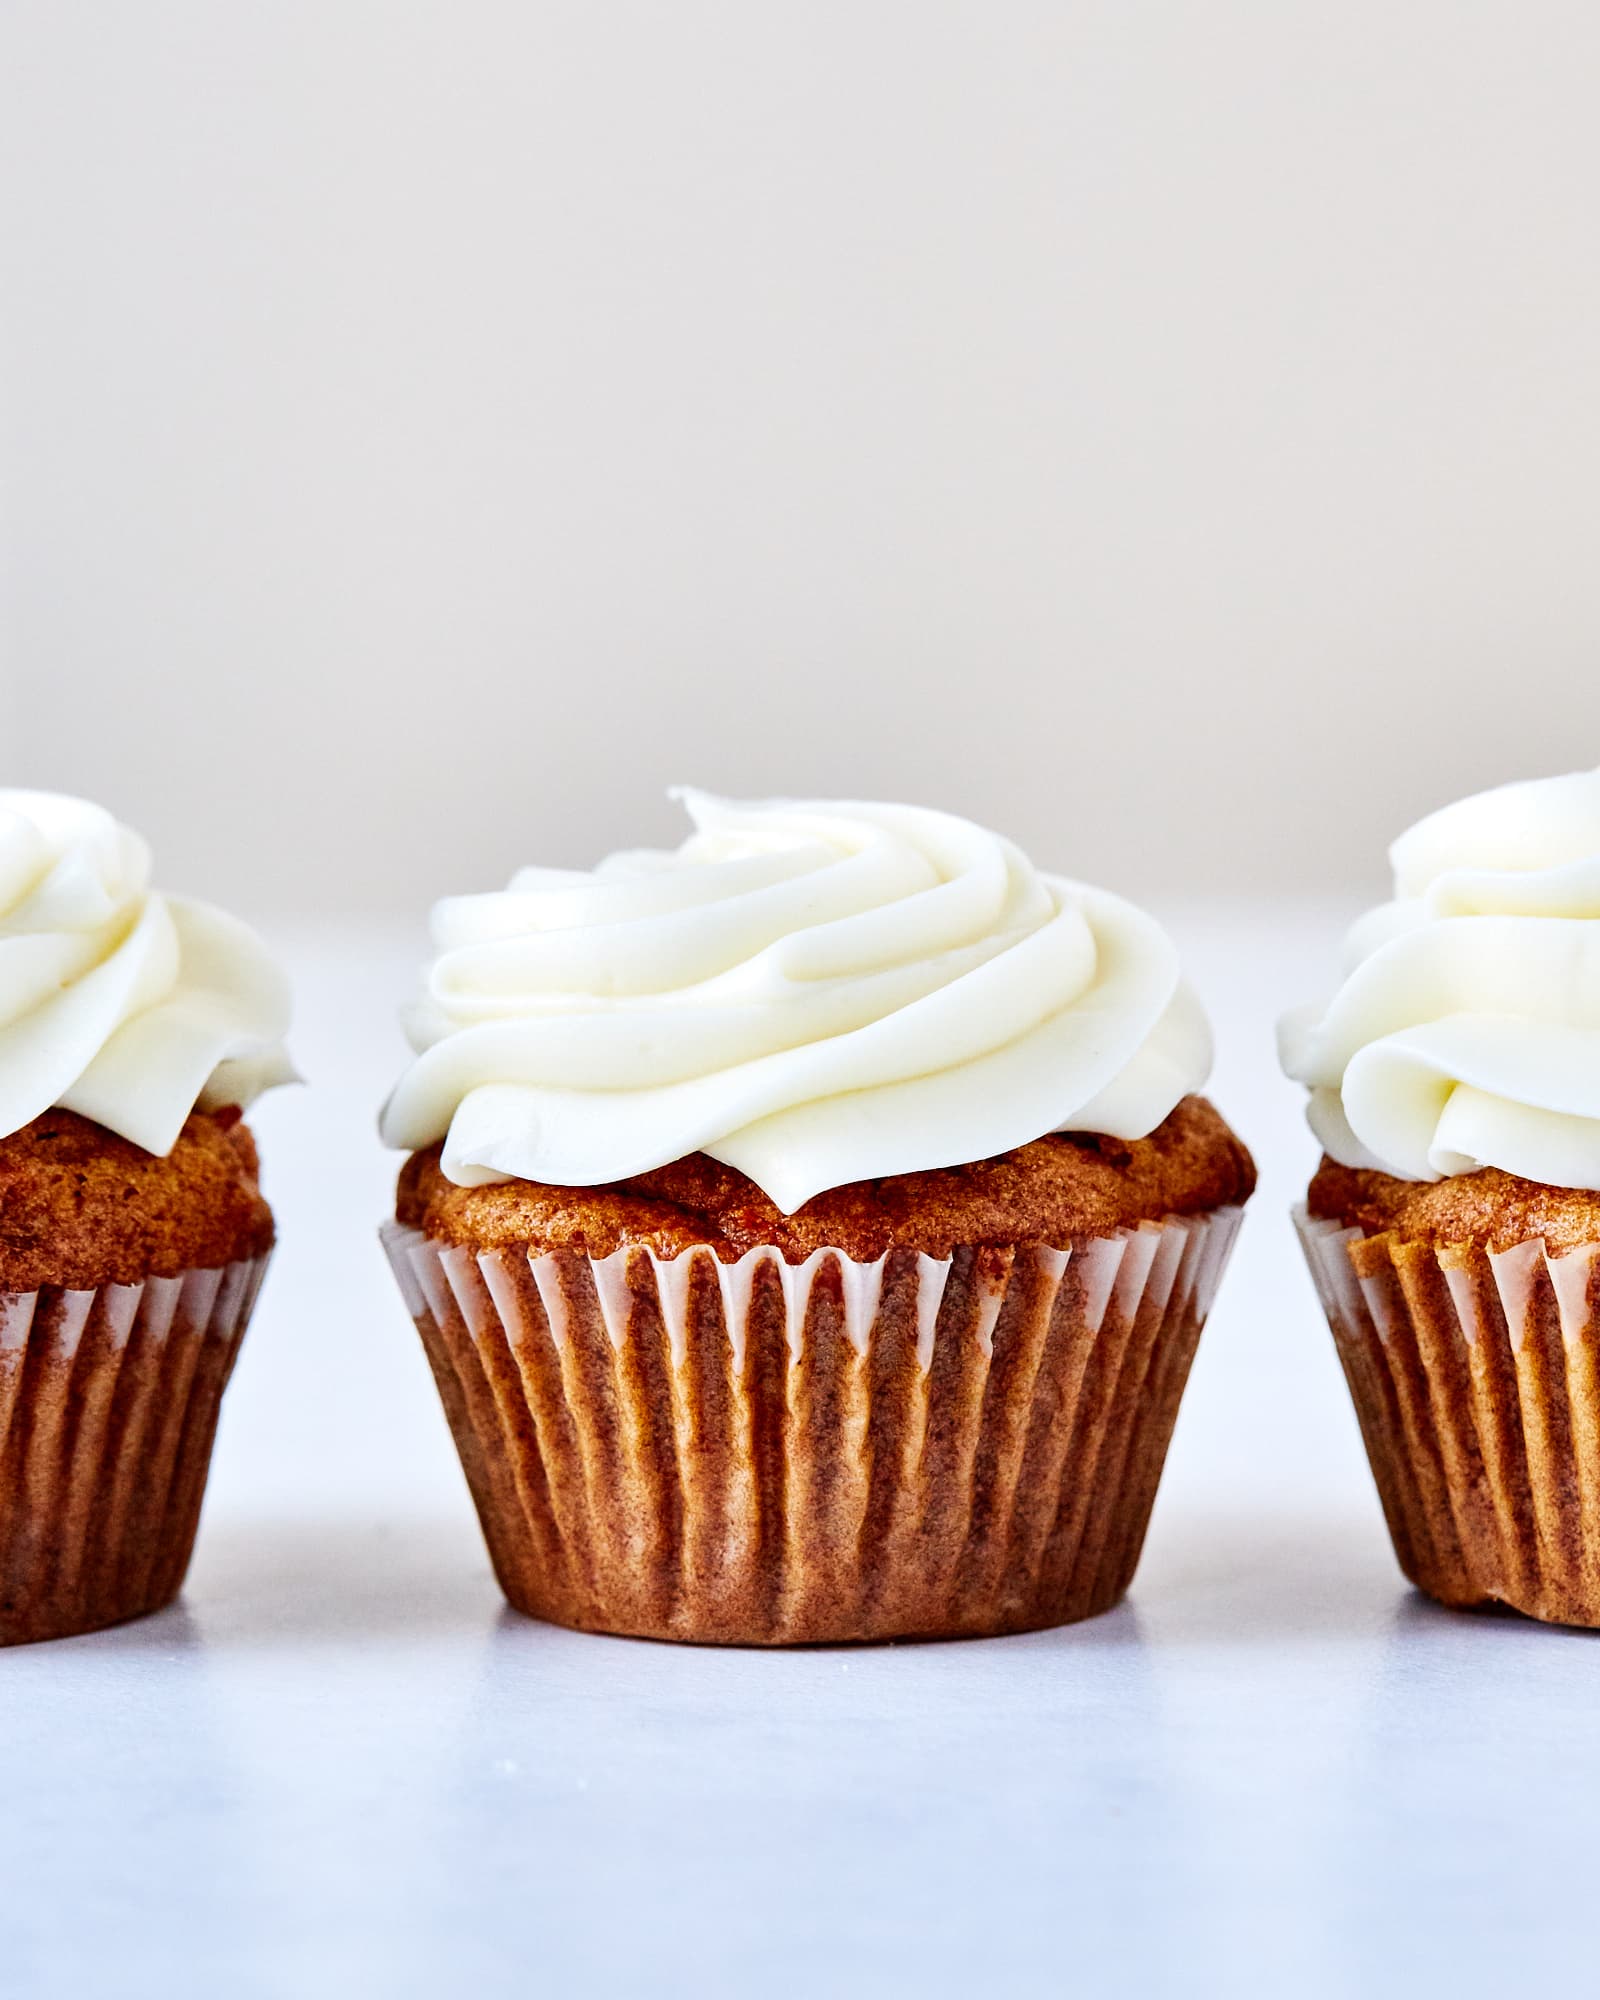 Easy Carrot Cake Cupcakes with Cream Cheese Frosting | Kitchn